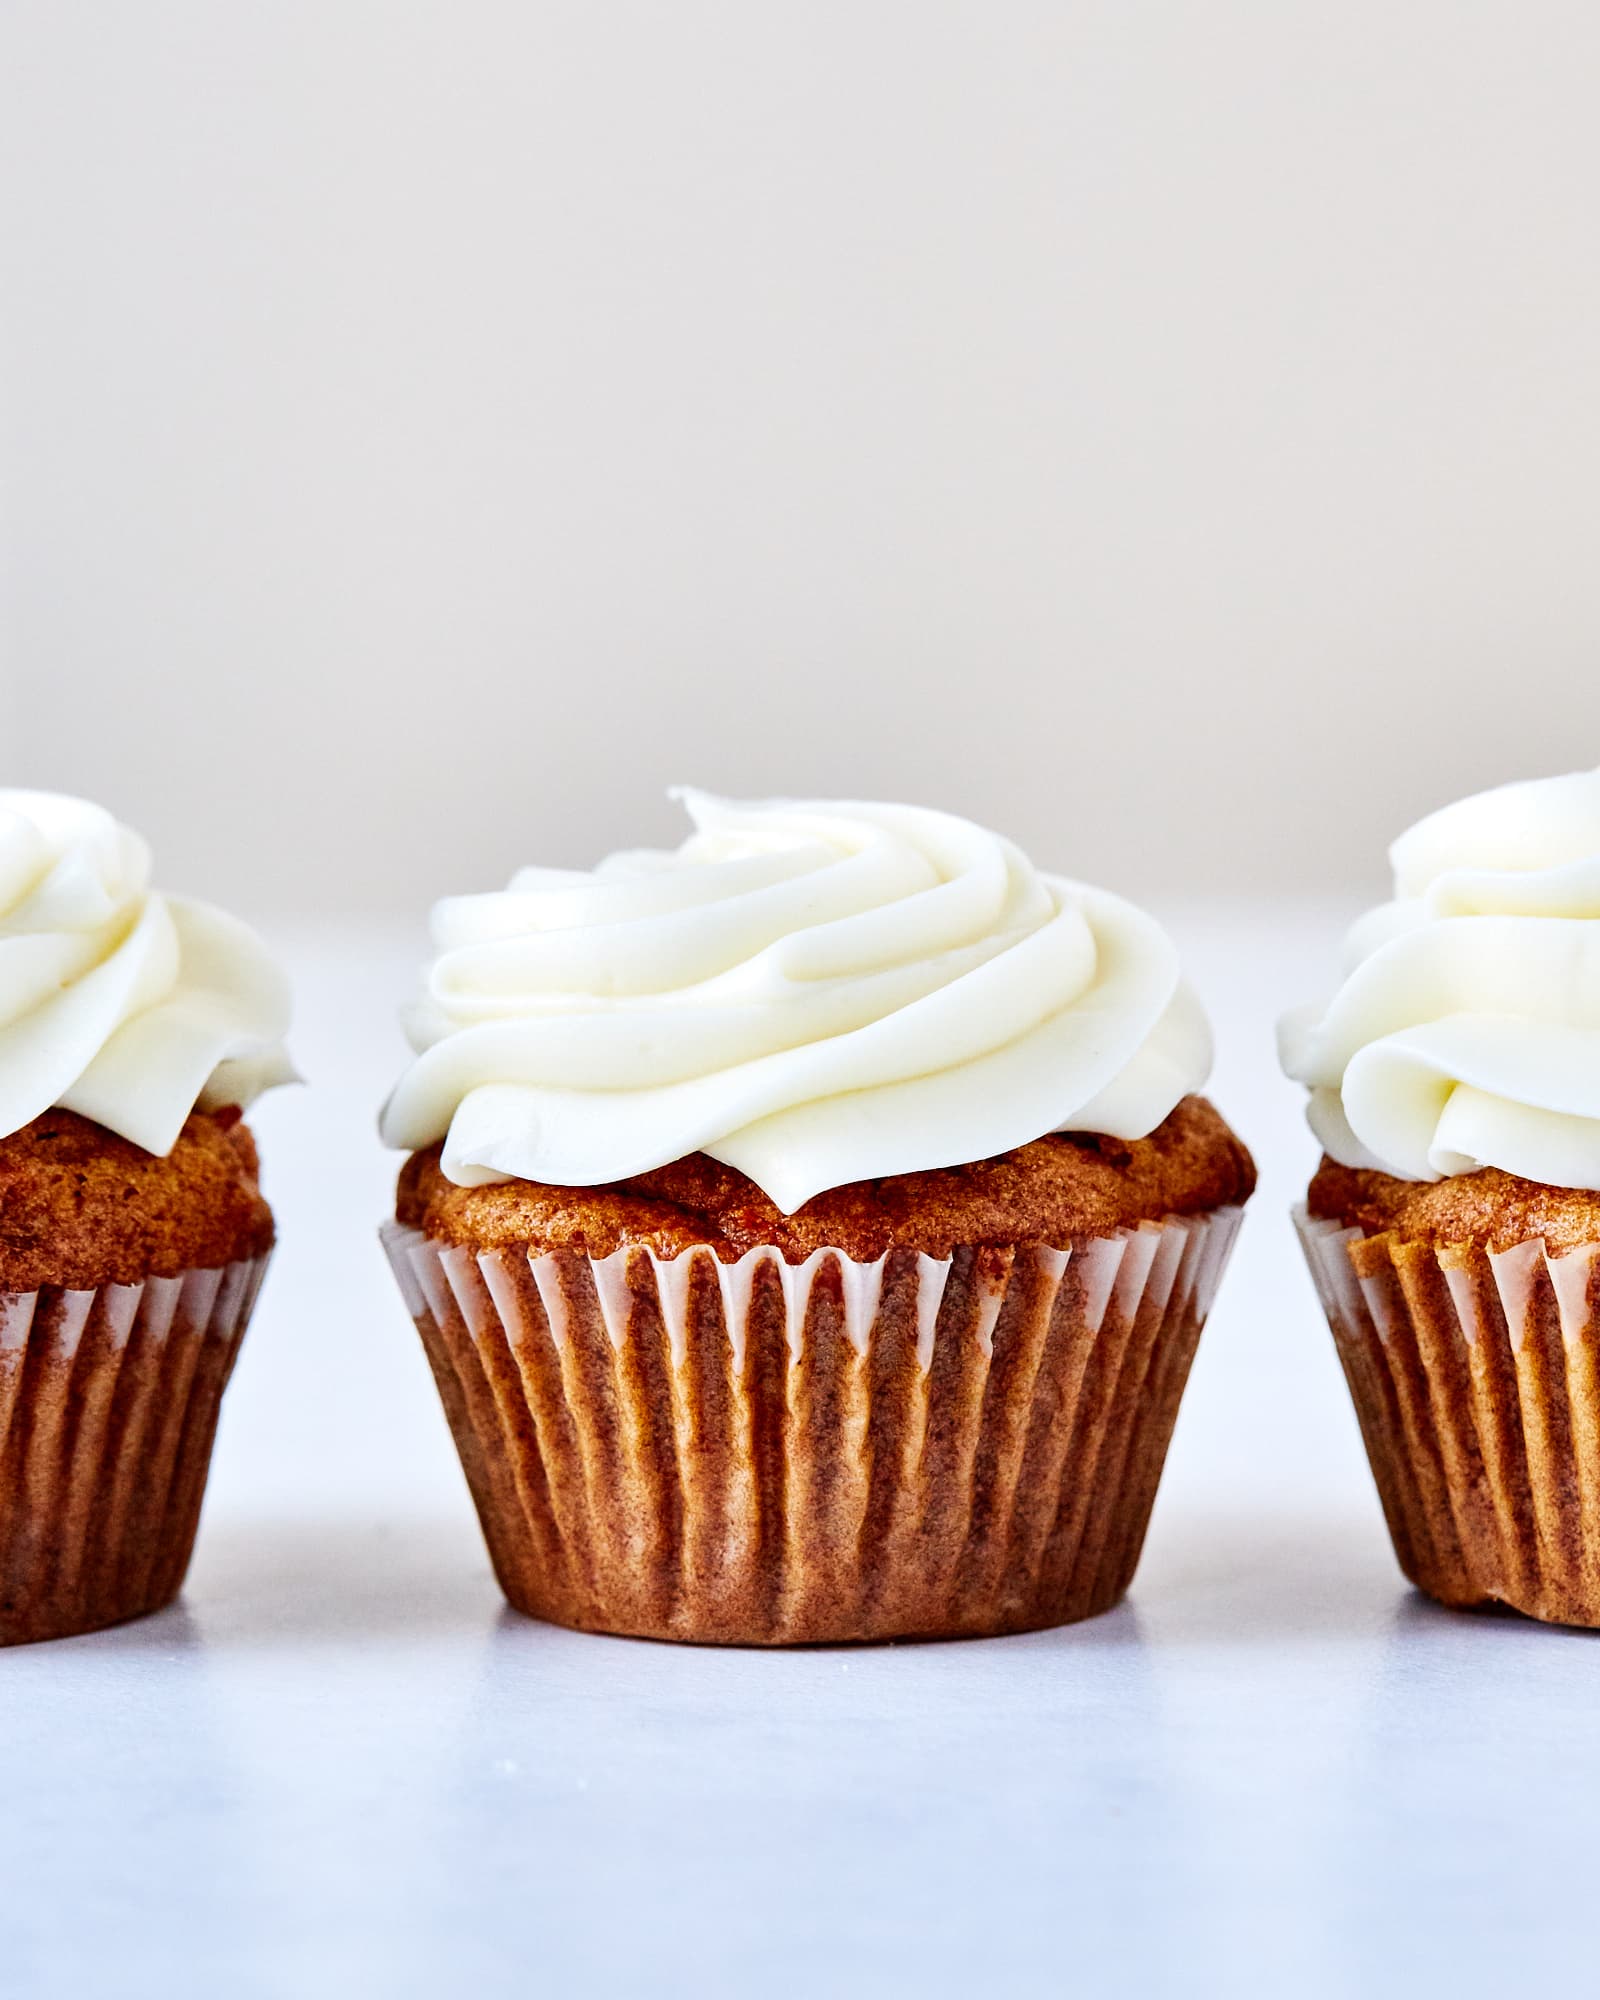 Easy Carrot Cake Cupcakes with Cream Cheese Frosting | Kitchn